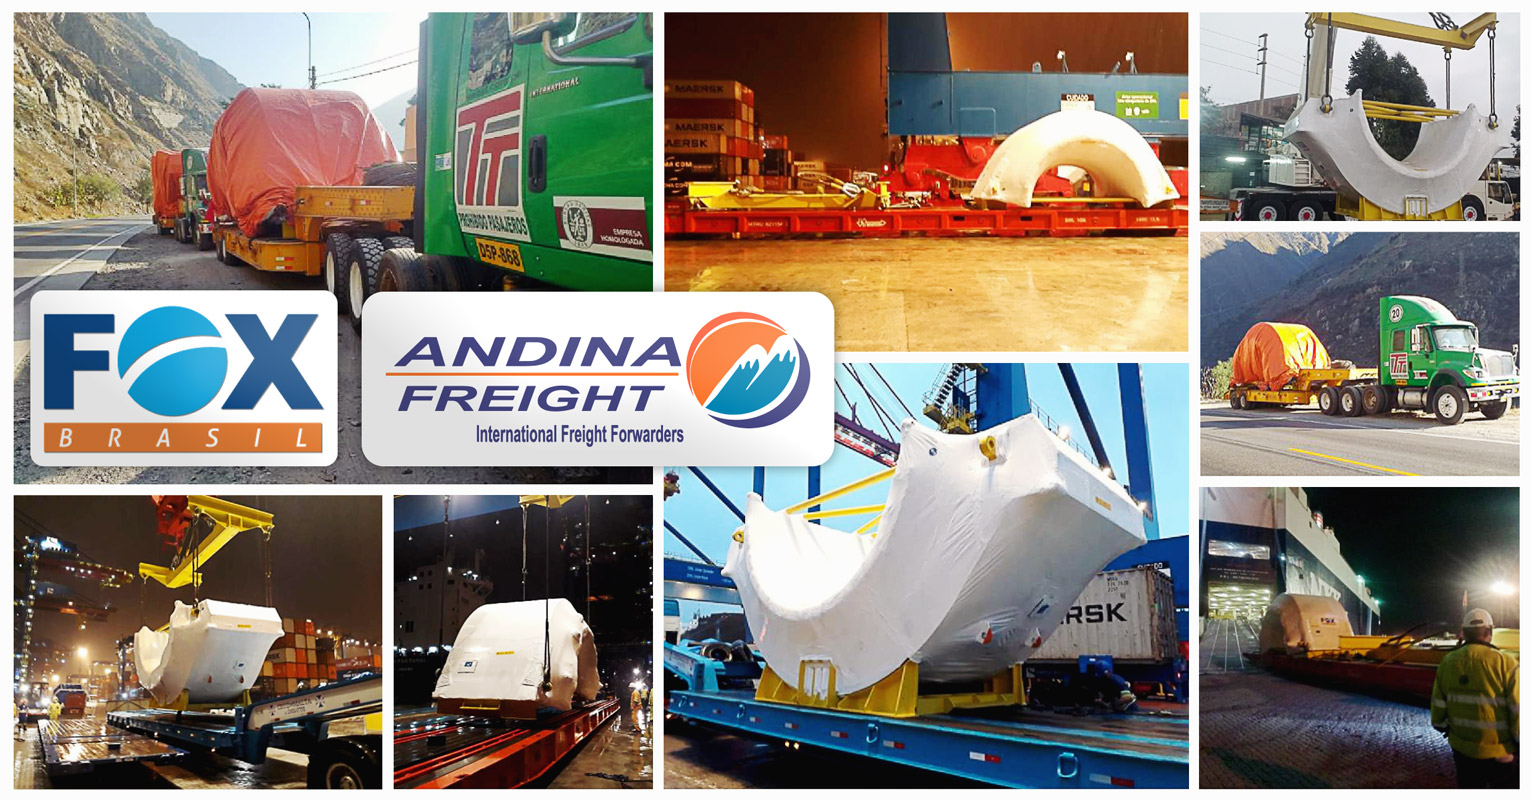 Joint Project - FOX Brasil and Andina Freight Peru Delivered 2 Stators for a Hydroelectric Project